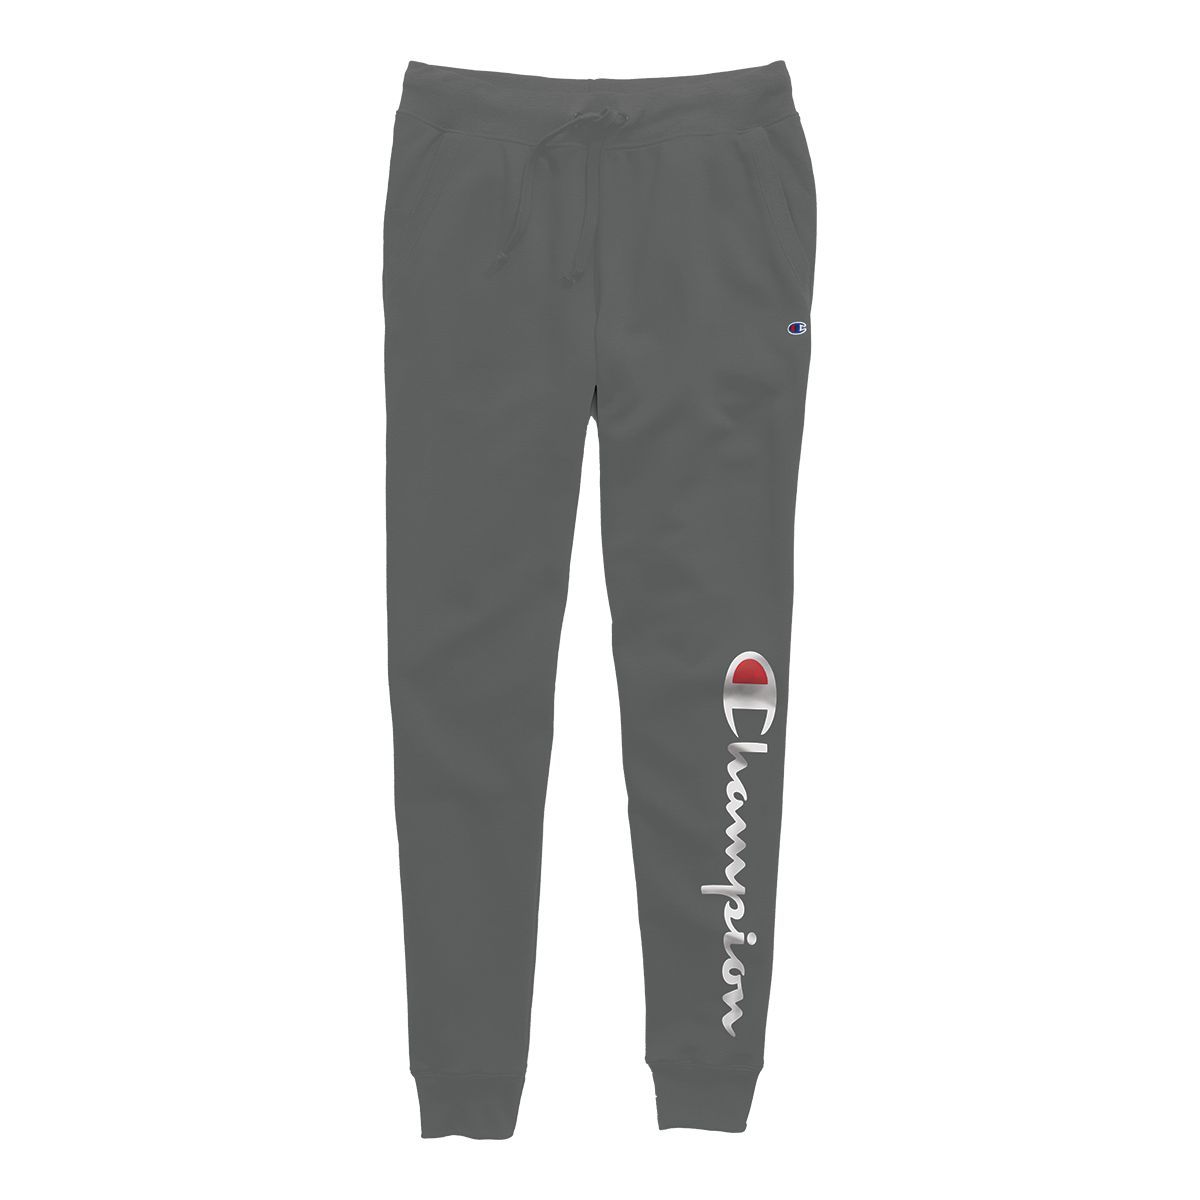 NEW MEMBER'S MARK PANTS WOMEN'S, SZ S! They are comfy for home AND dre –  The Warehouse Liquidation